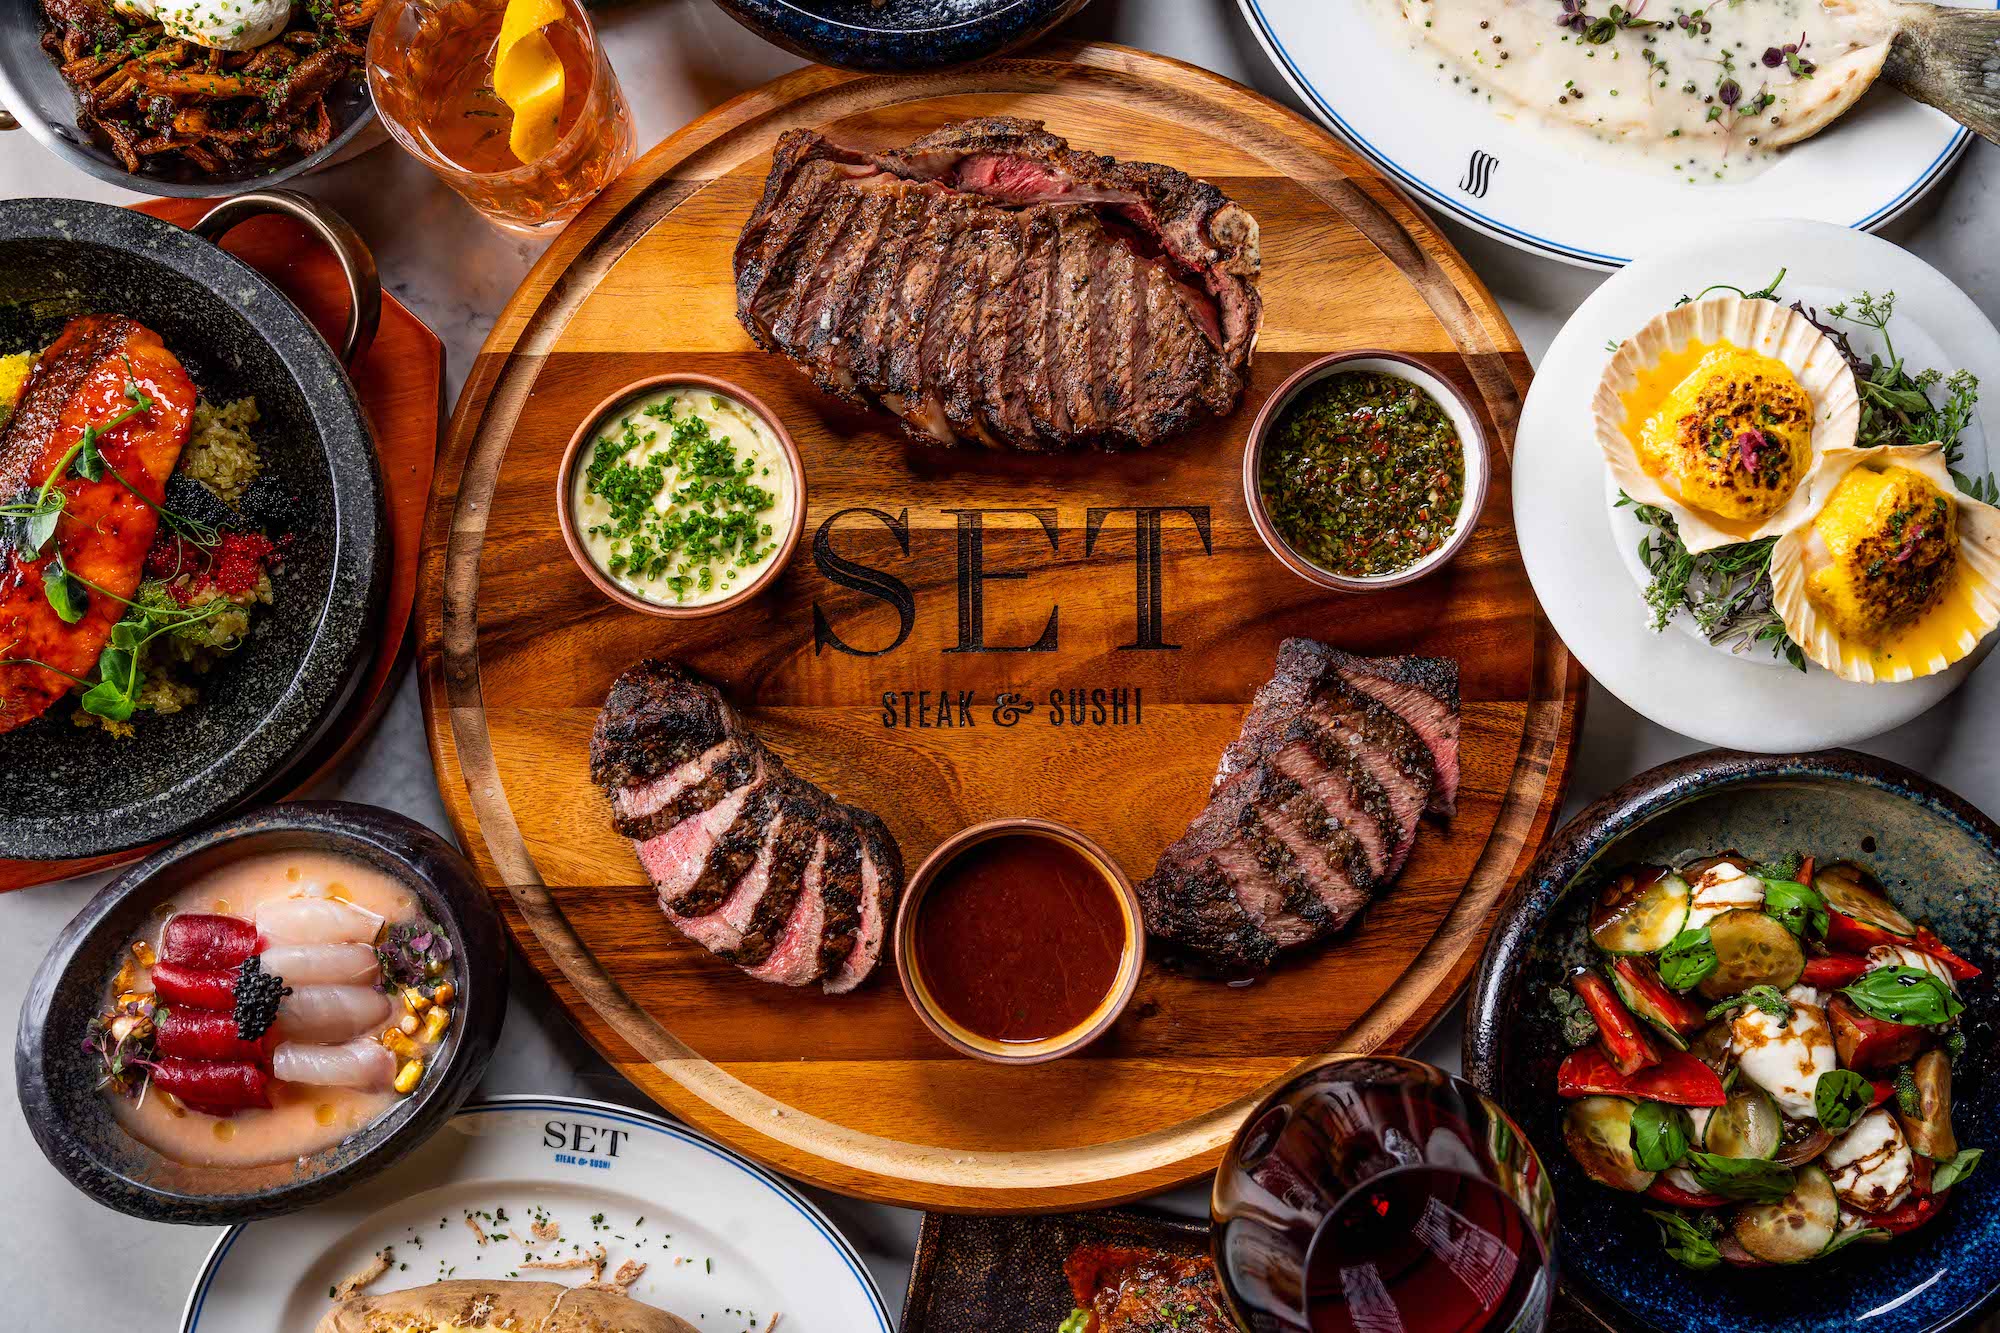 An overhead shot of a grilled steak sliced onto a dark round cutting board and surrounded by other dishes like scallops and vegetables.